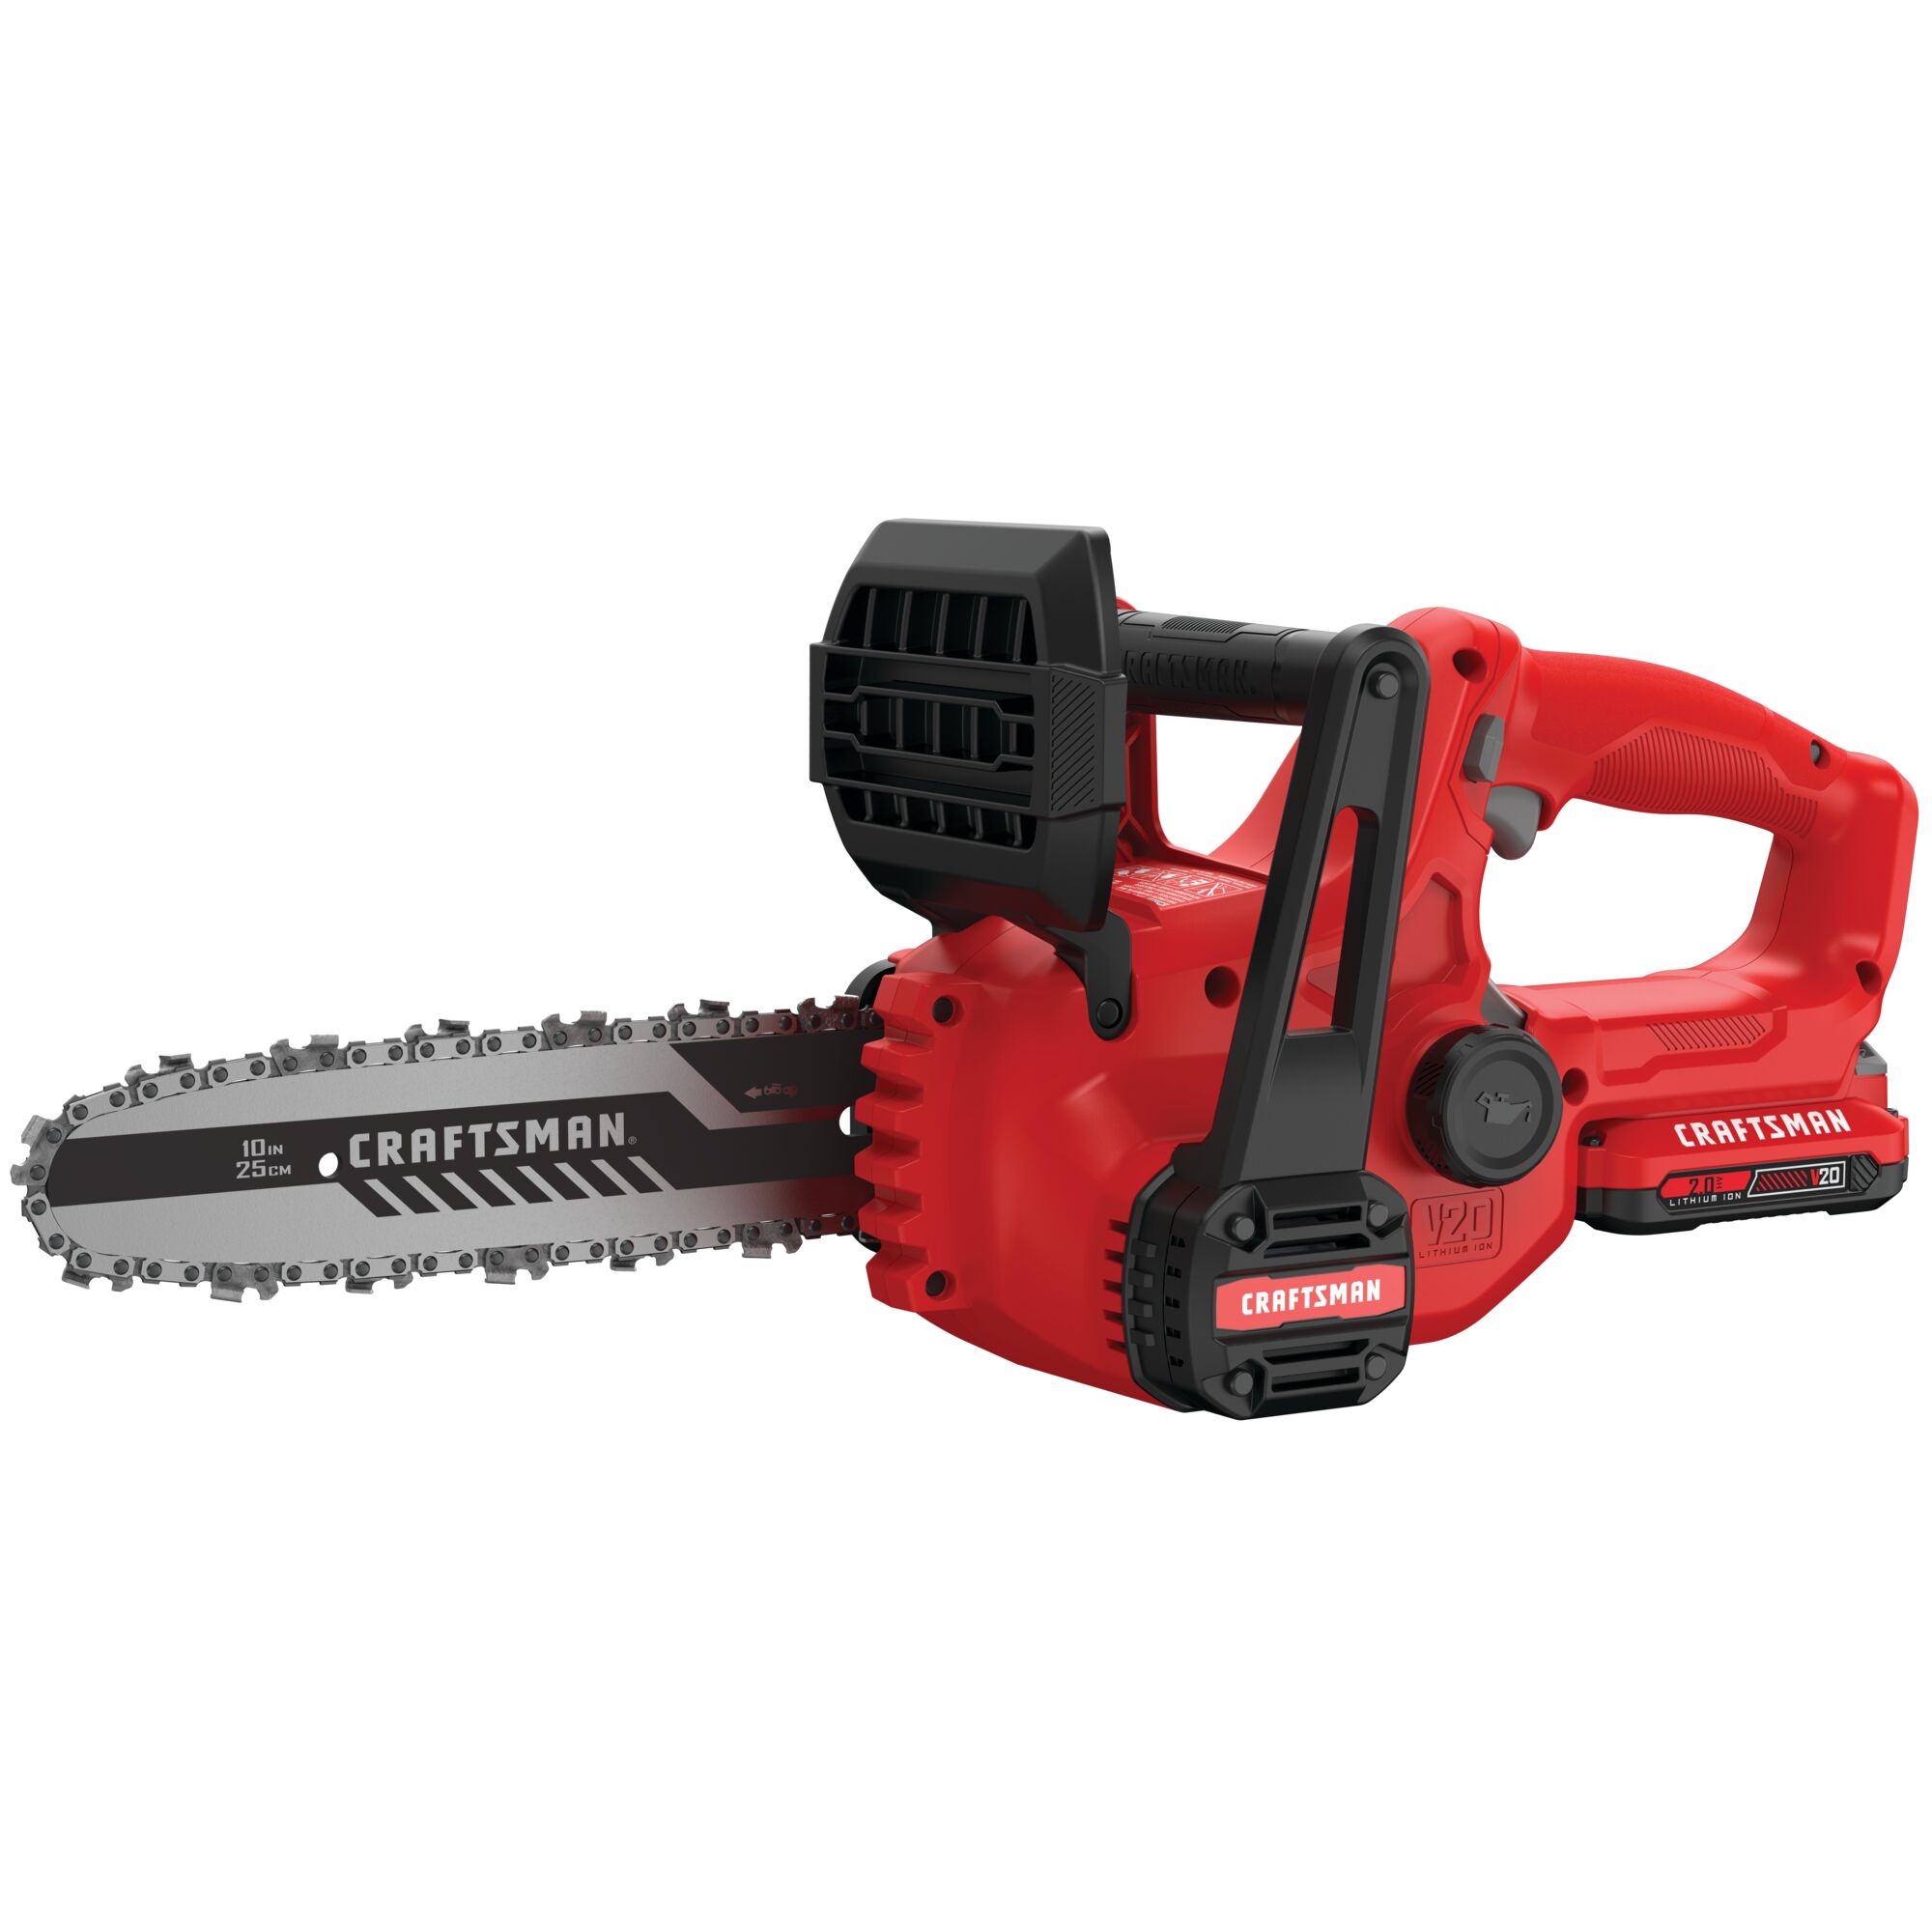 Cordless 10 inch chainsaw kit 2 amp hour.